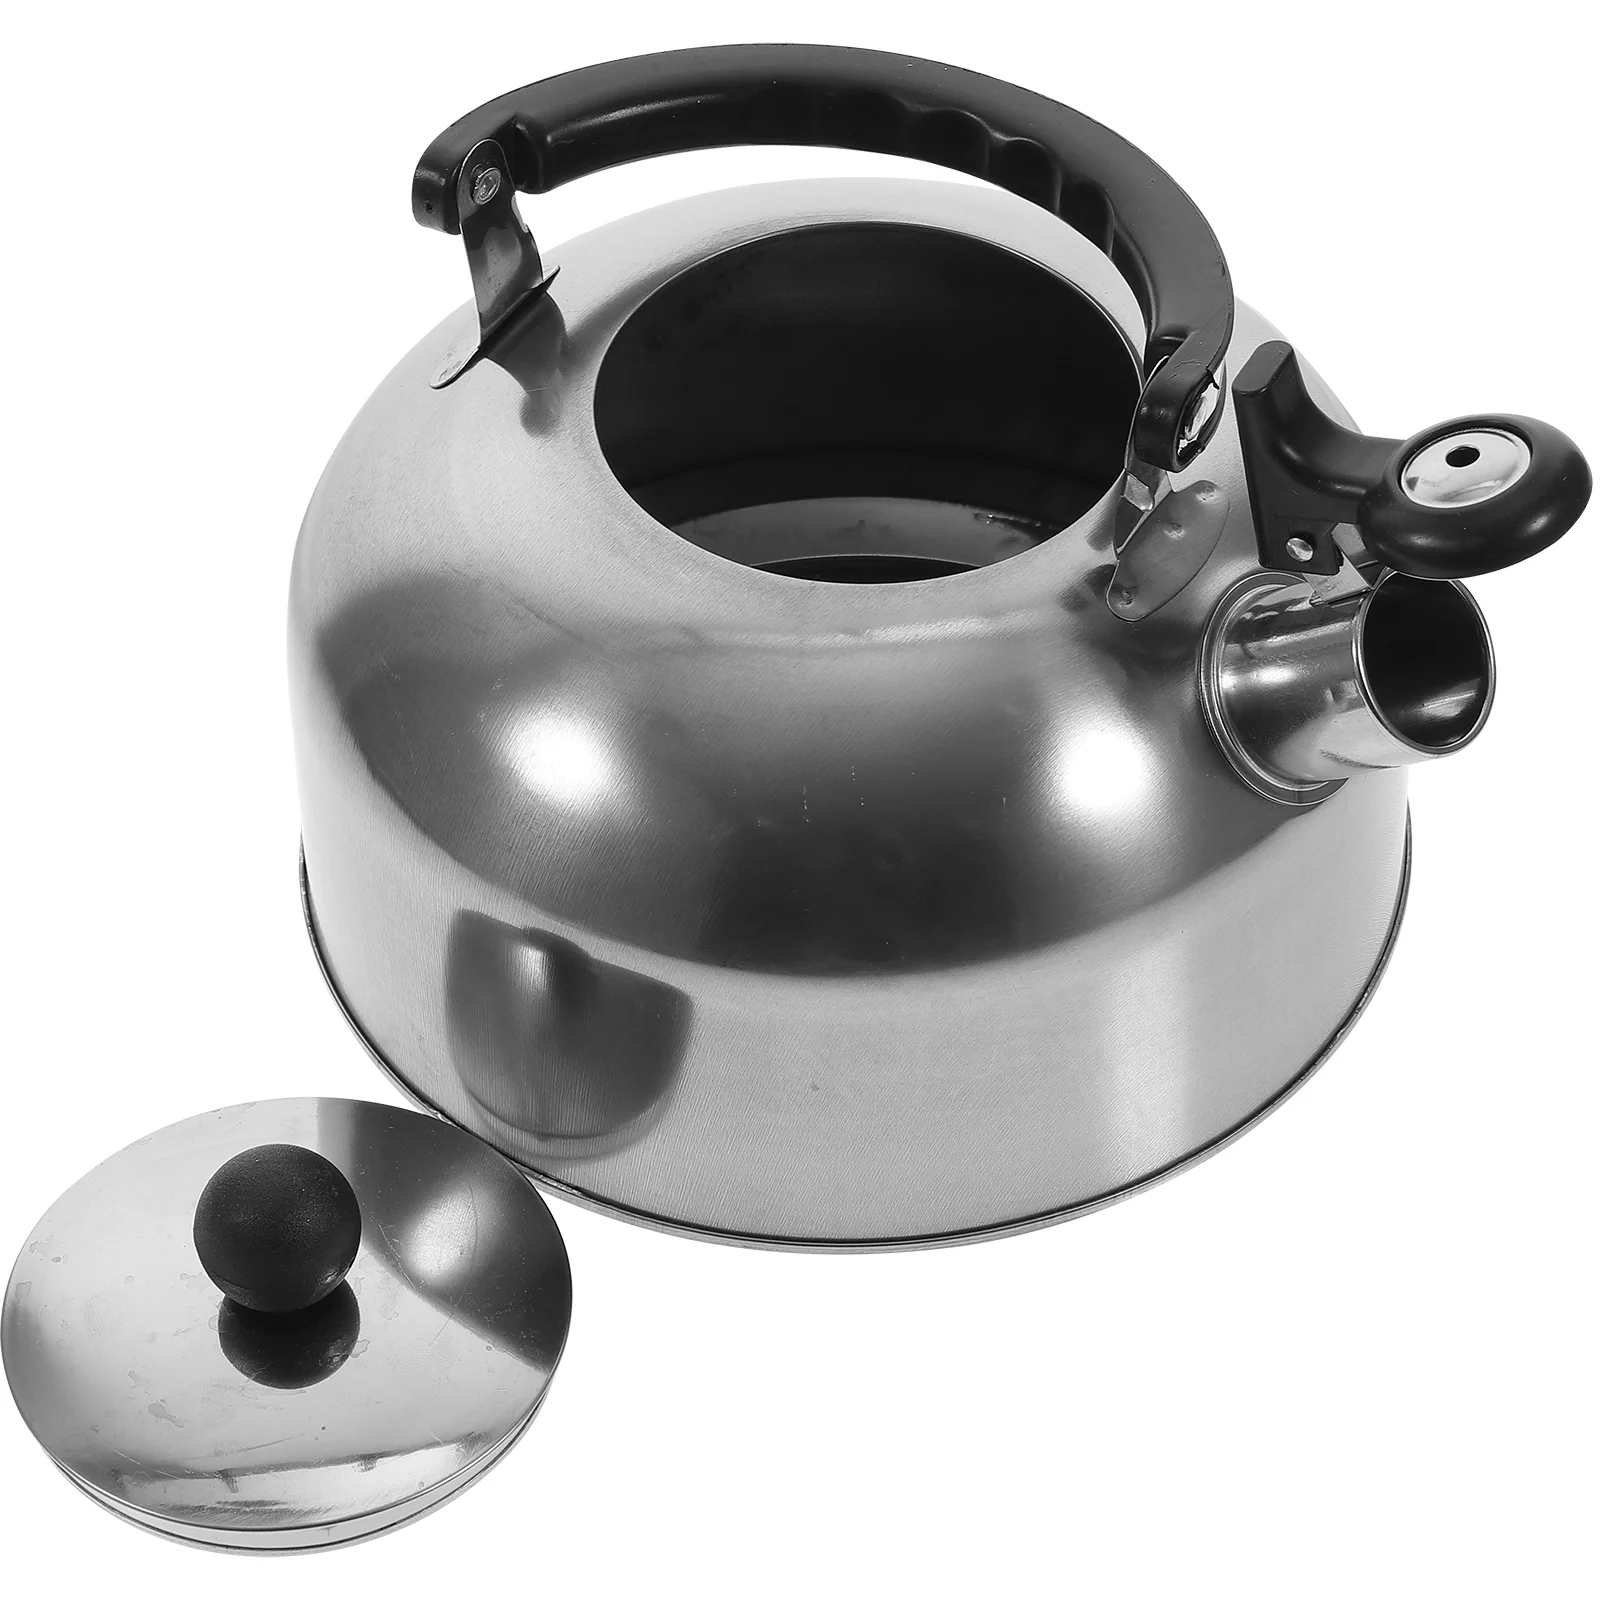 

Chirping Kettle Stainless Steel Whistling Camping Cooking Stove Gas Water Jug Teapot Boiling Coffee Metal Teapots